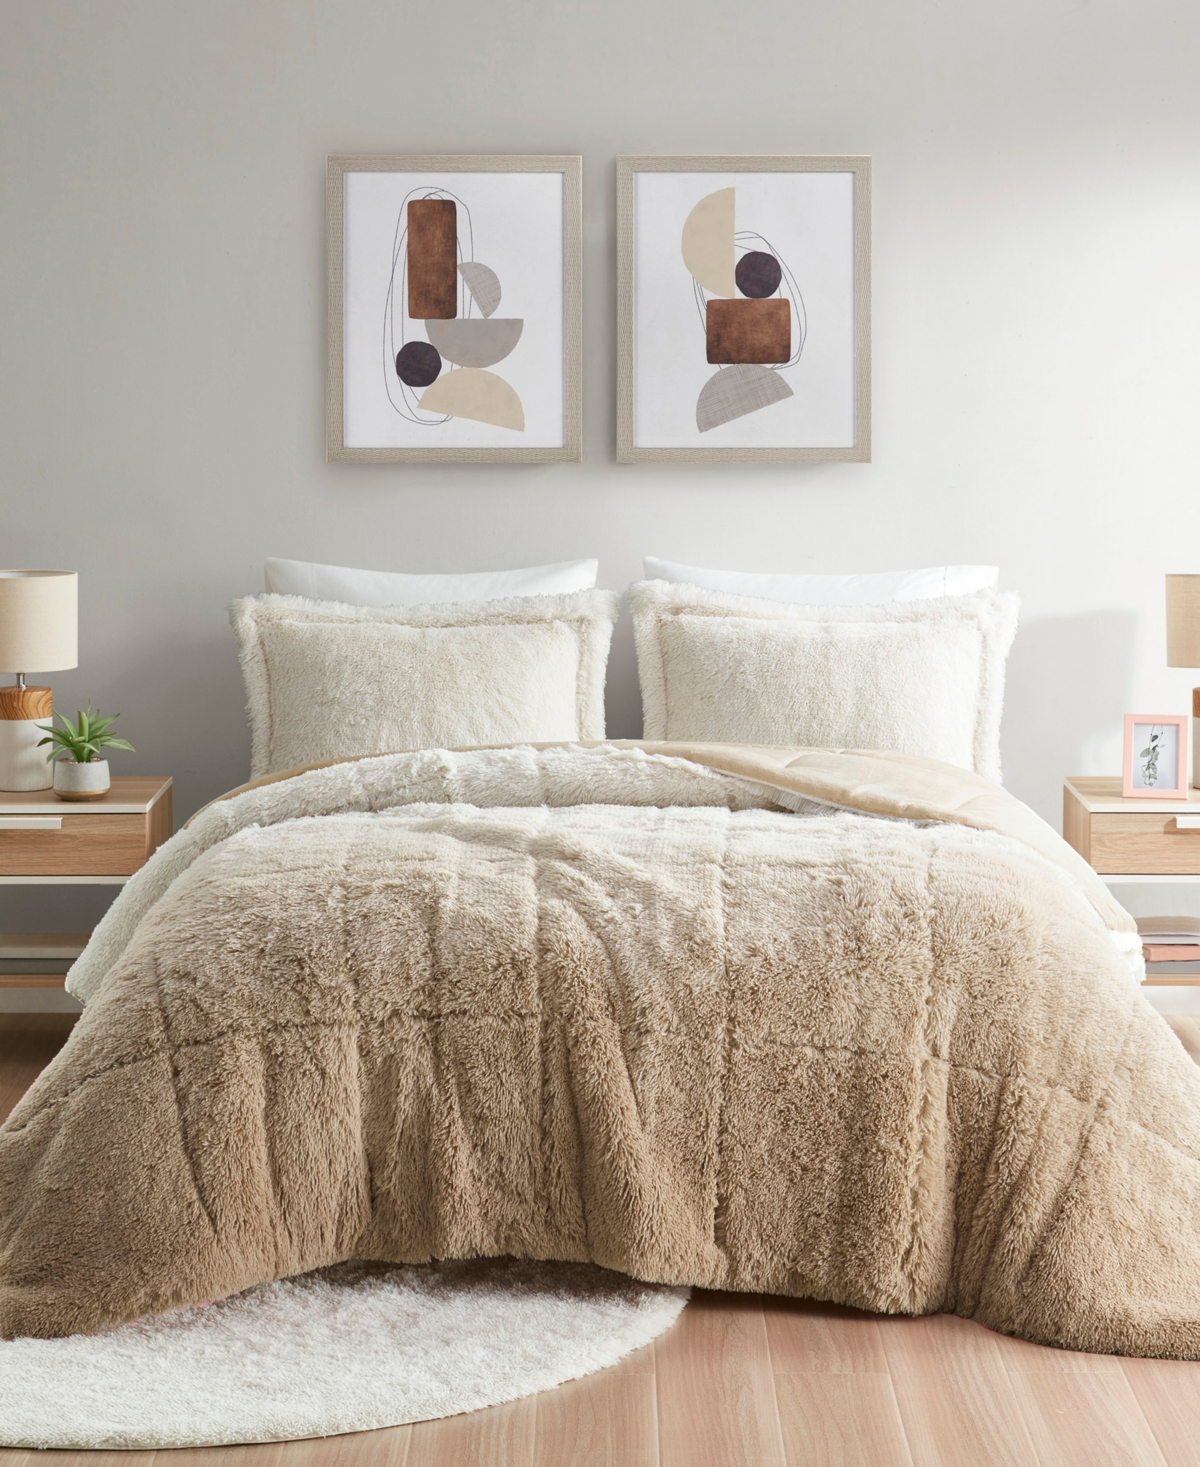 Intelligent Design Brielle Ombre Shaggy Faux Fur 2-pc. Comforter Set, Twin/twin Xl In Natural